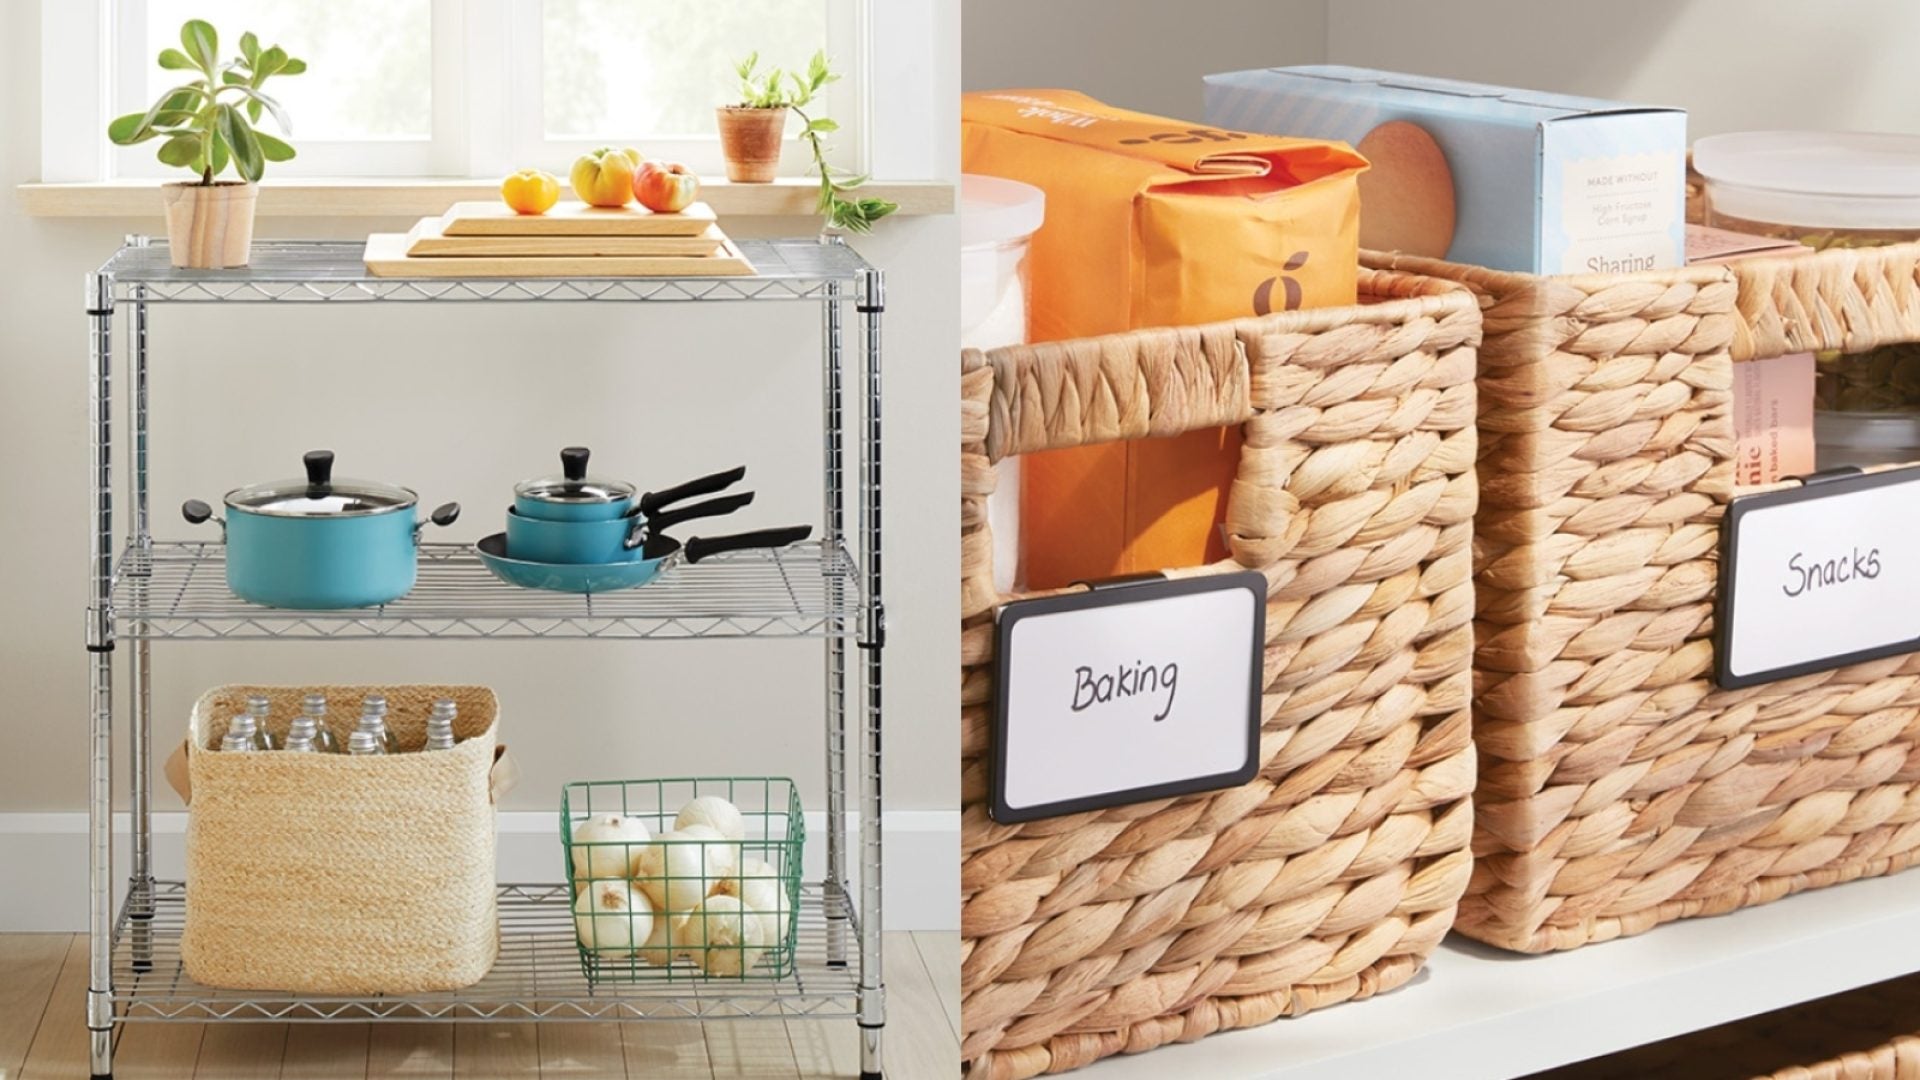 5 Storage Products That Can Help Keep Your Home Organized